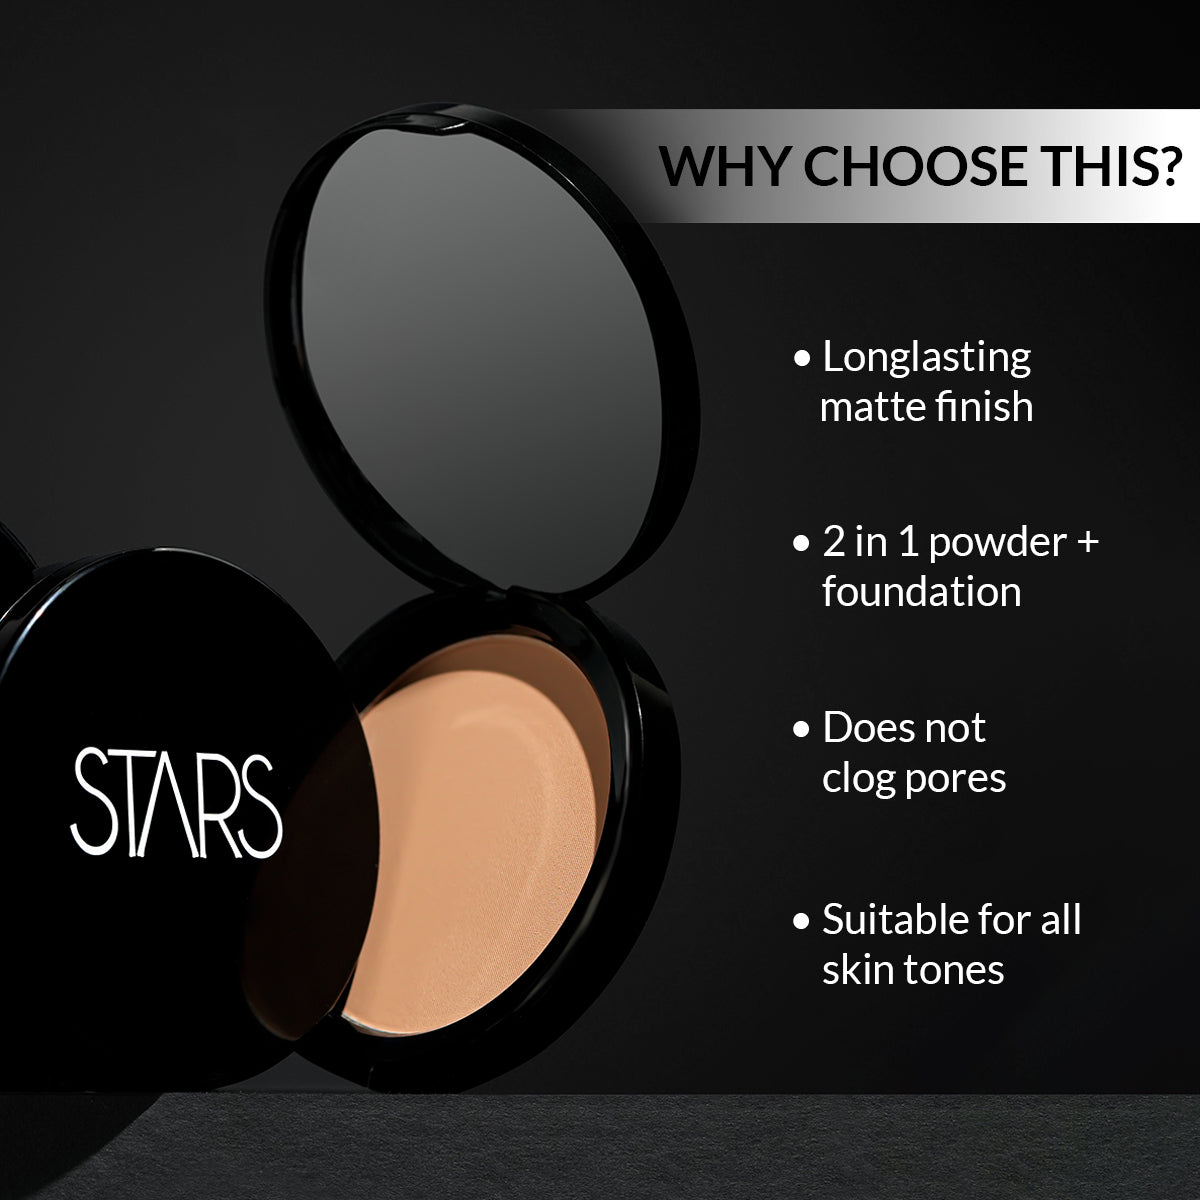 Stars Cosmetics Makeup Products